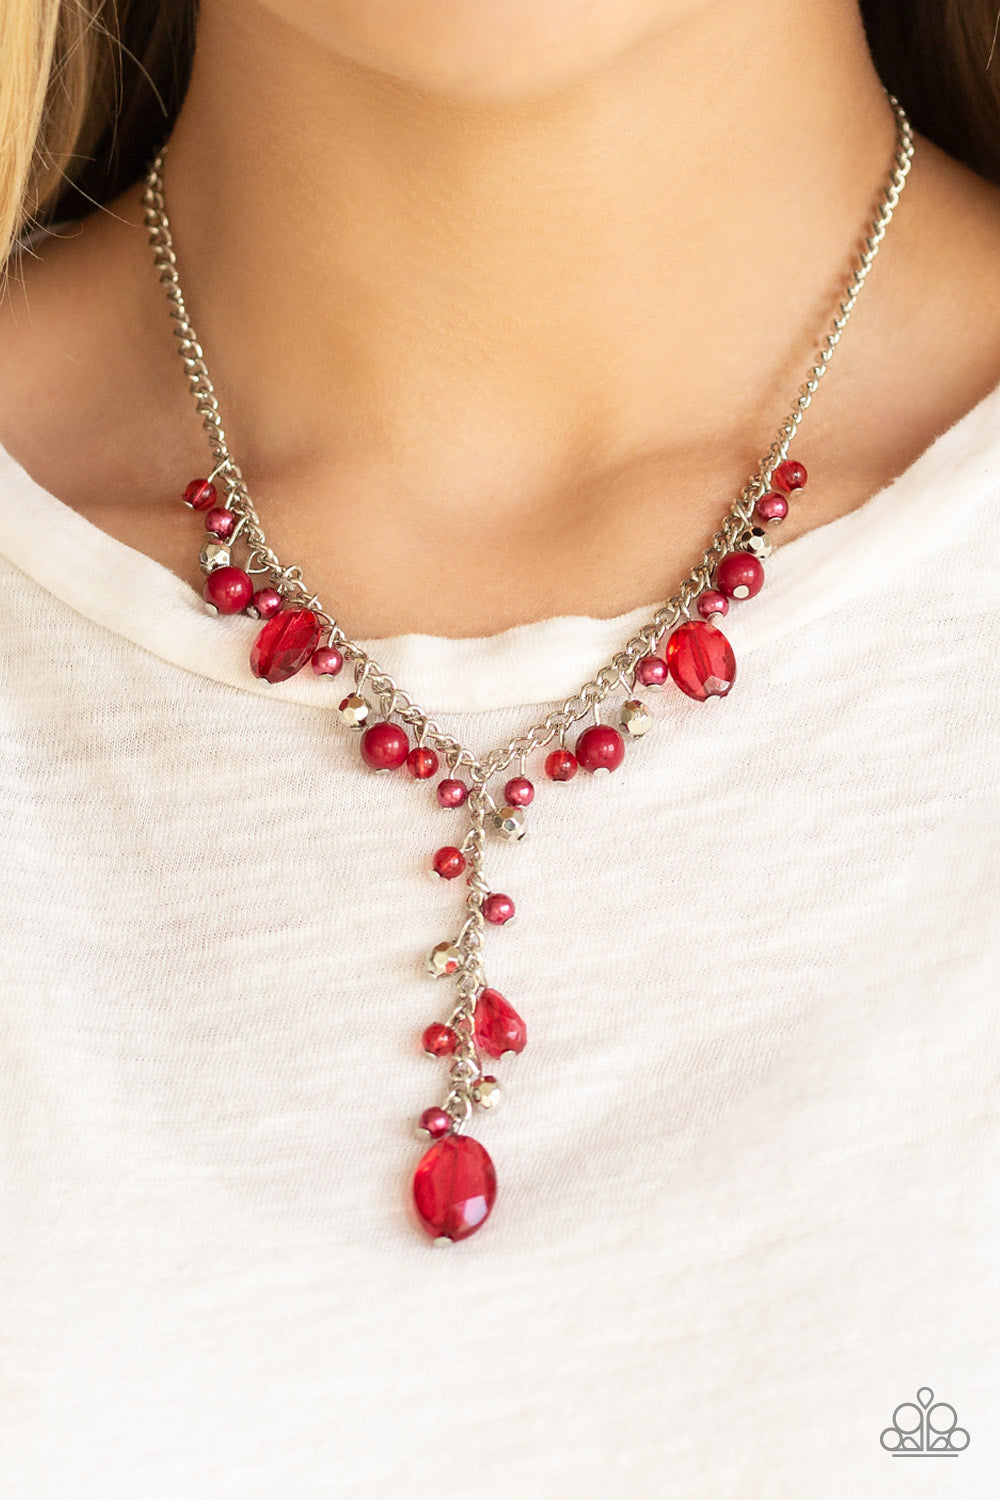 Paparazzi Necklaces - Crystal Couture - Red